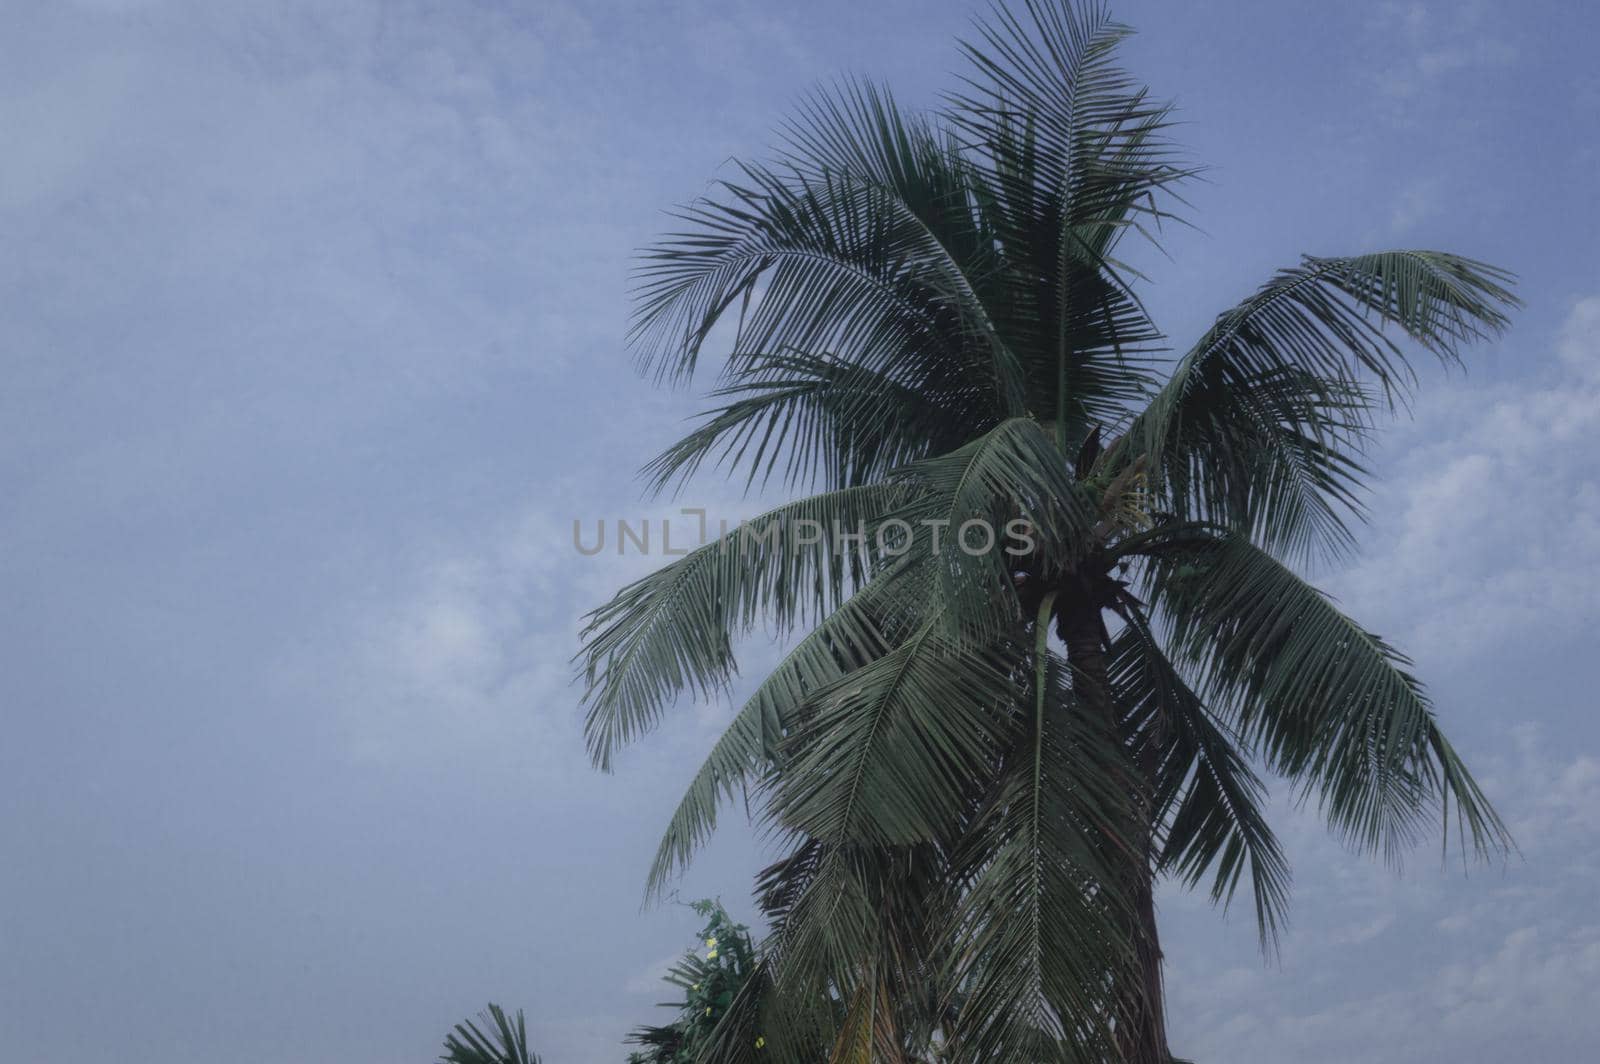 Coconut Palm tree background photo in Autumn seasonal theme back-lit but vibrant color sunrise sky. Palm tree in illuminated by sunlight. Goa Sea Beach India. Beauty in nature horizon Backgrounds. by sudiptabhowmick